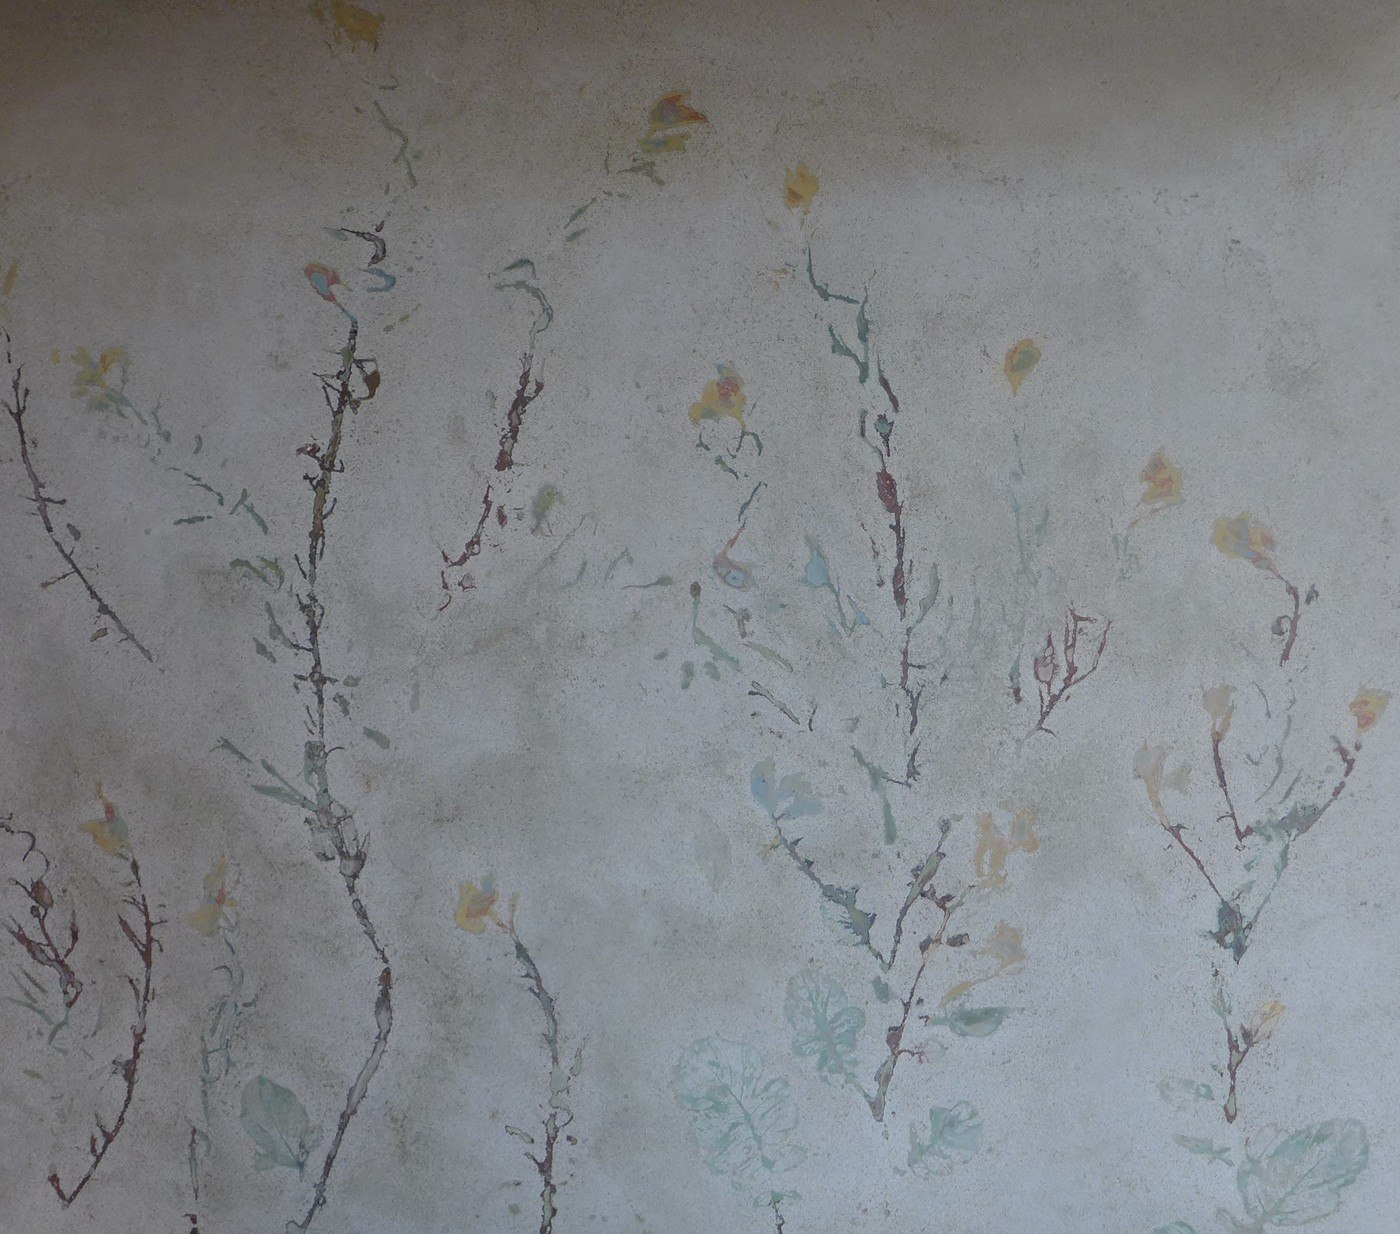 Concrete backsplash with flowers, weeds impressions with various yellows, turquoise, and pale red colors